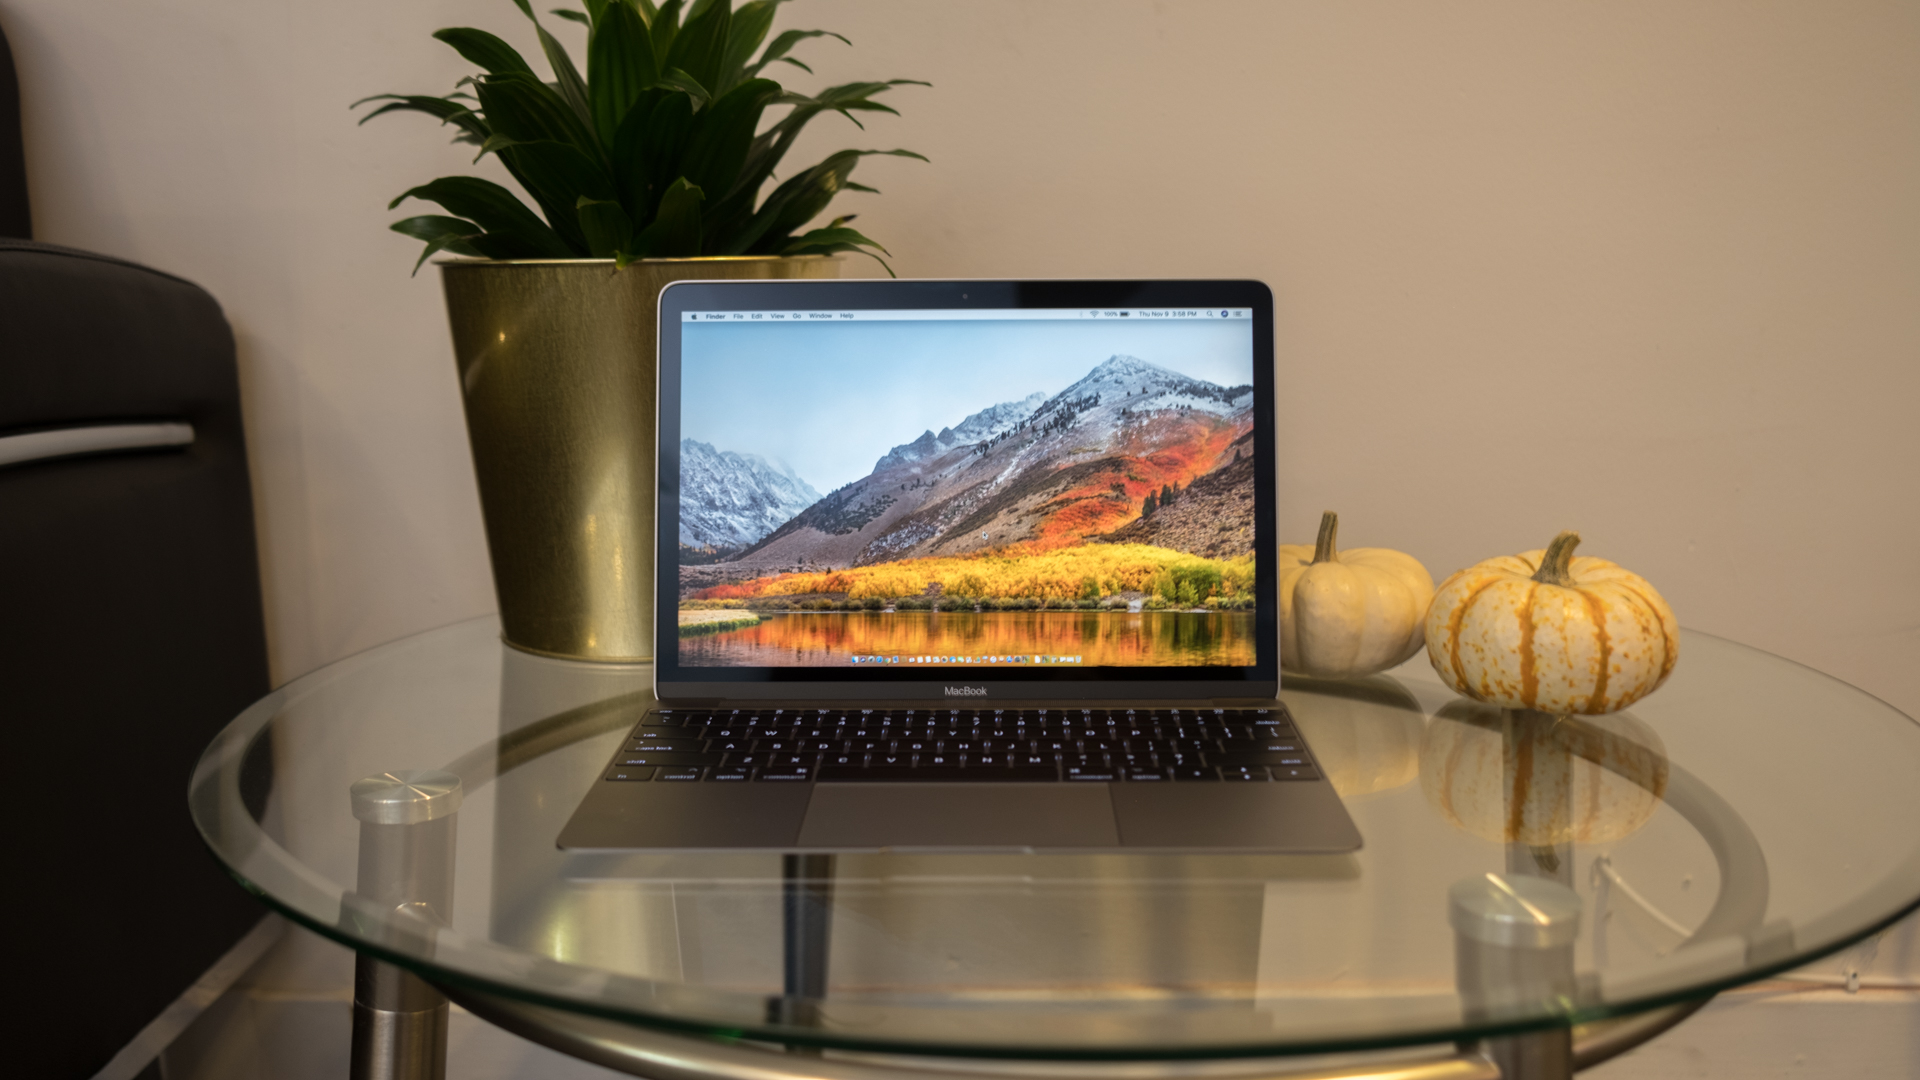 jord Surrey Reparation mulig Performance, battery life and verdict - Apple MacBook (2017) review: thin,  light and beautiful - Page 2 | TechRadar